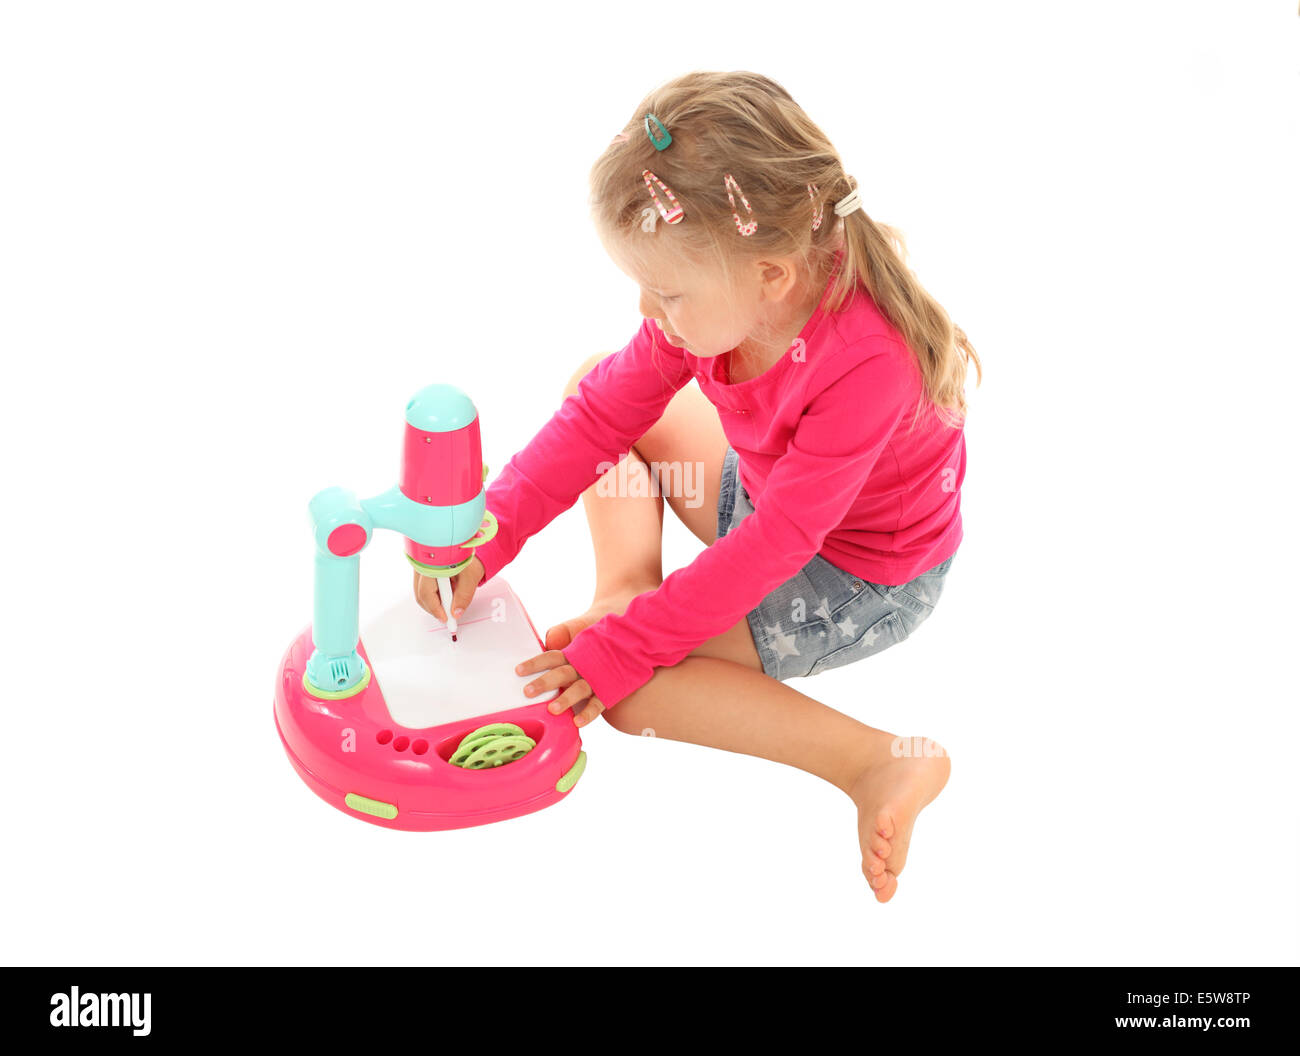 Little girl drawing picture with a toy projector Stock Photo